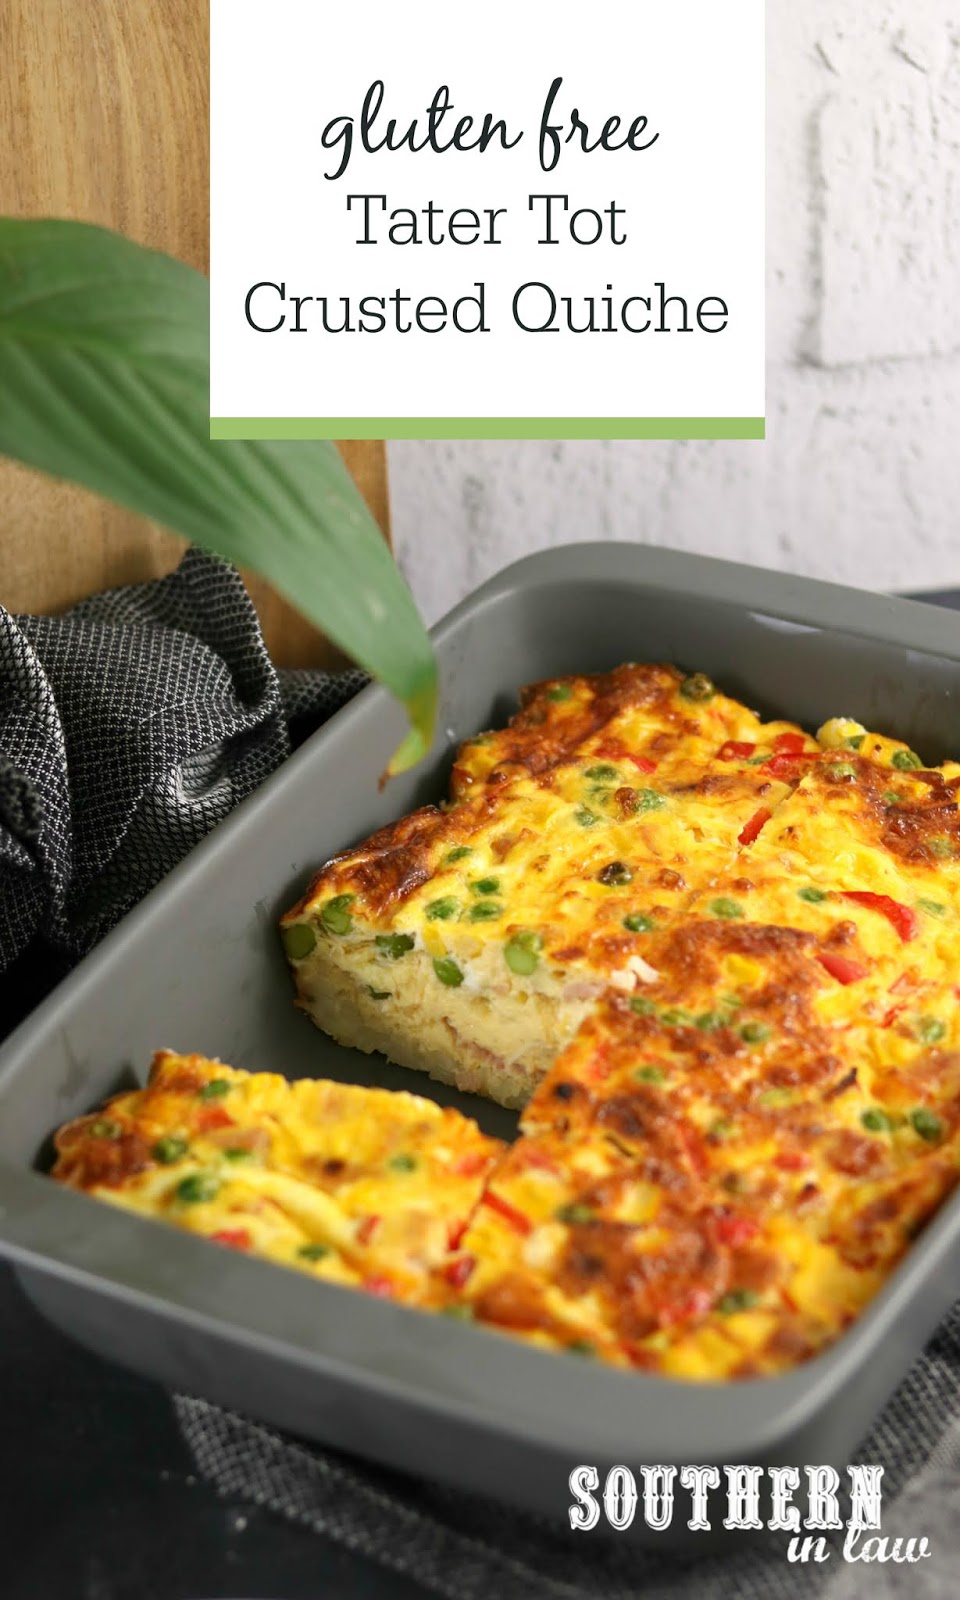 Southern In Law: Recipe: Tater Tot Crusted Quiche (Gluten Free!)